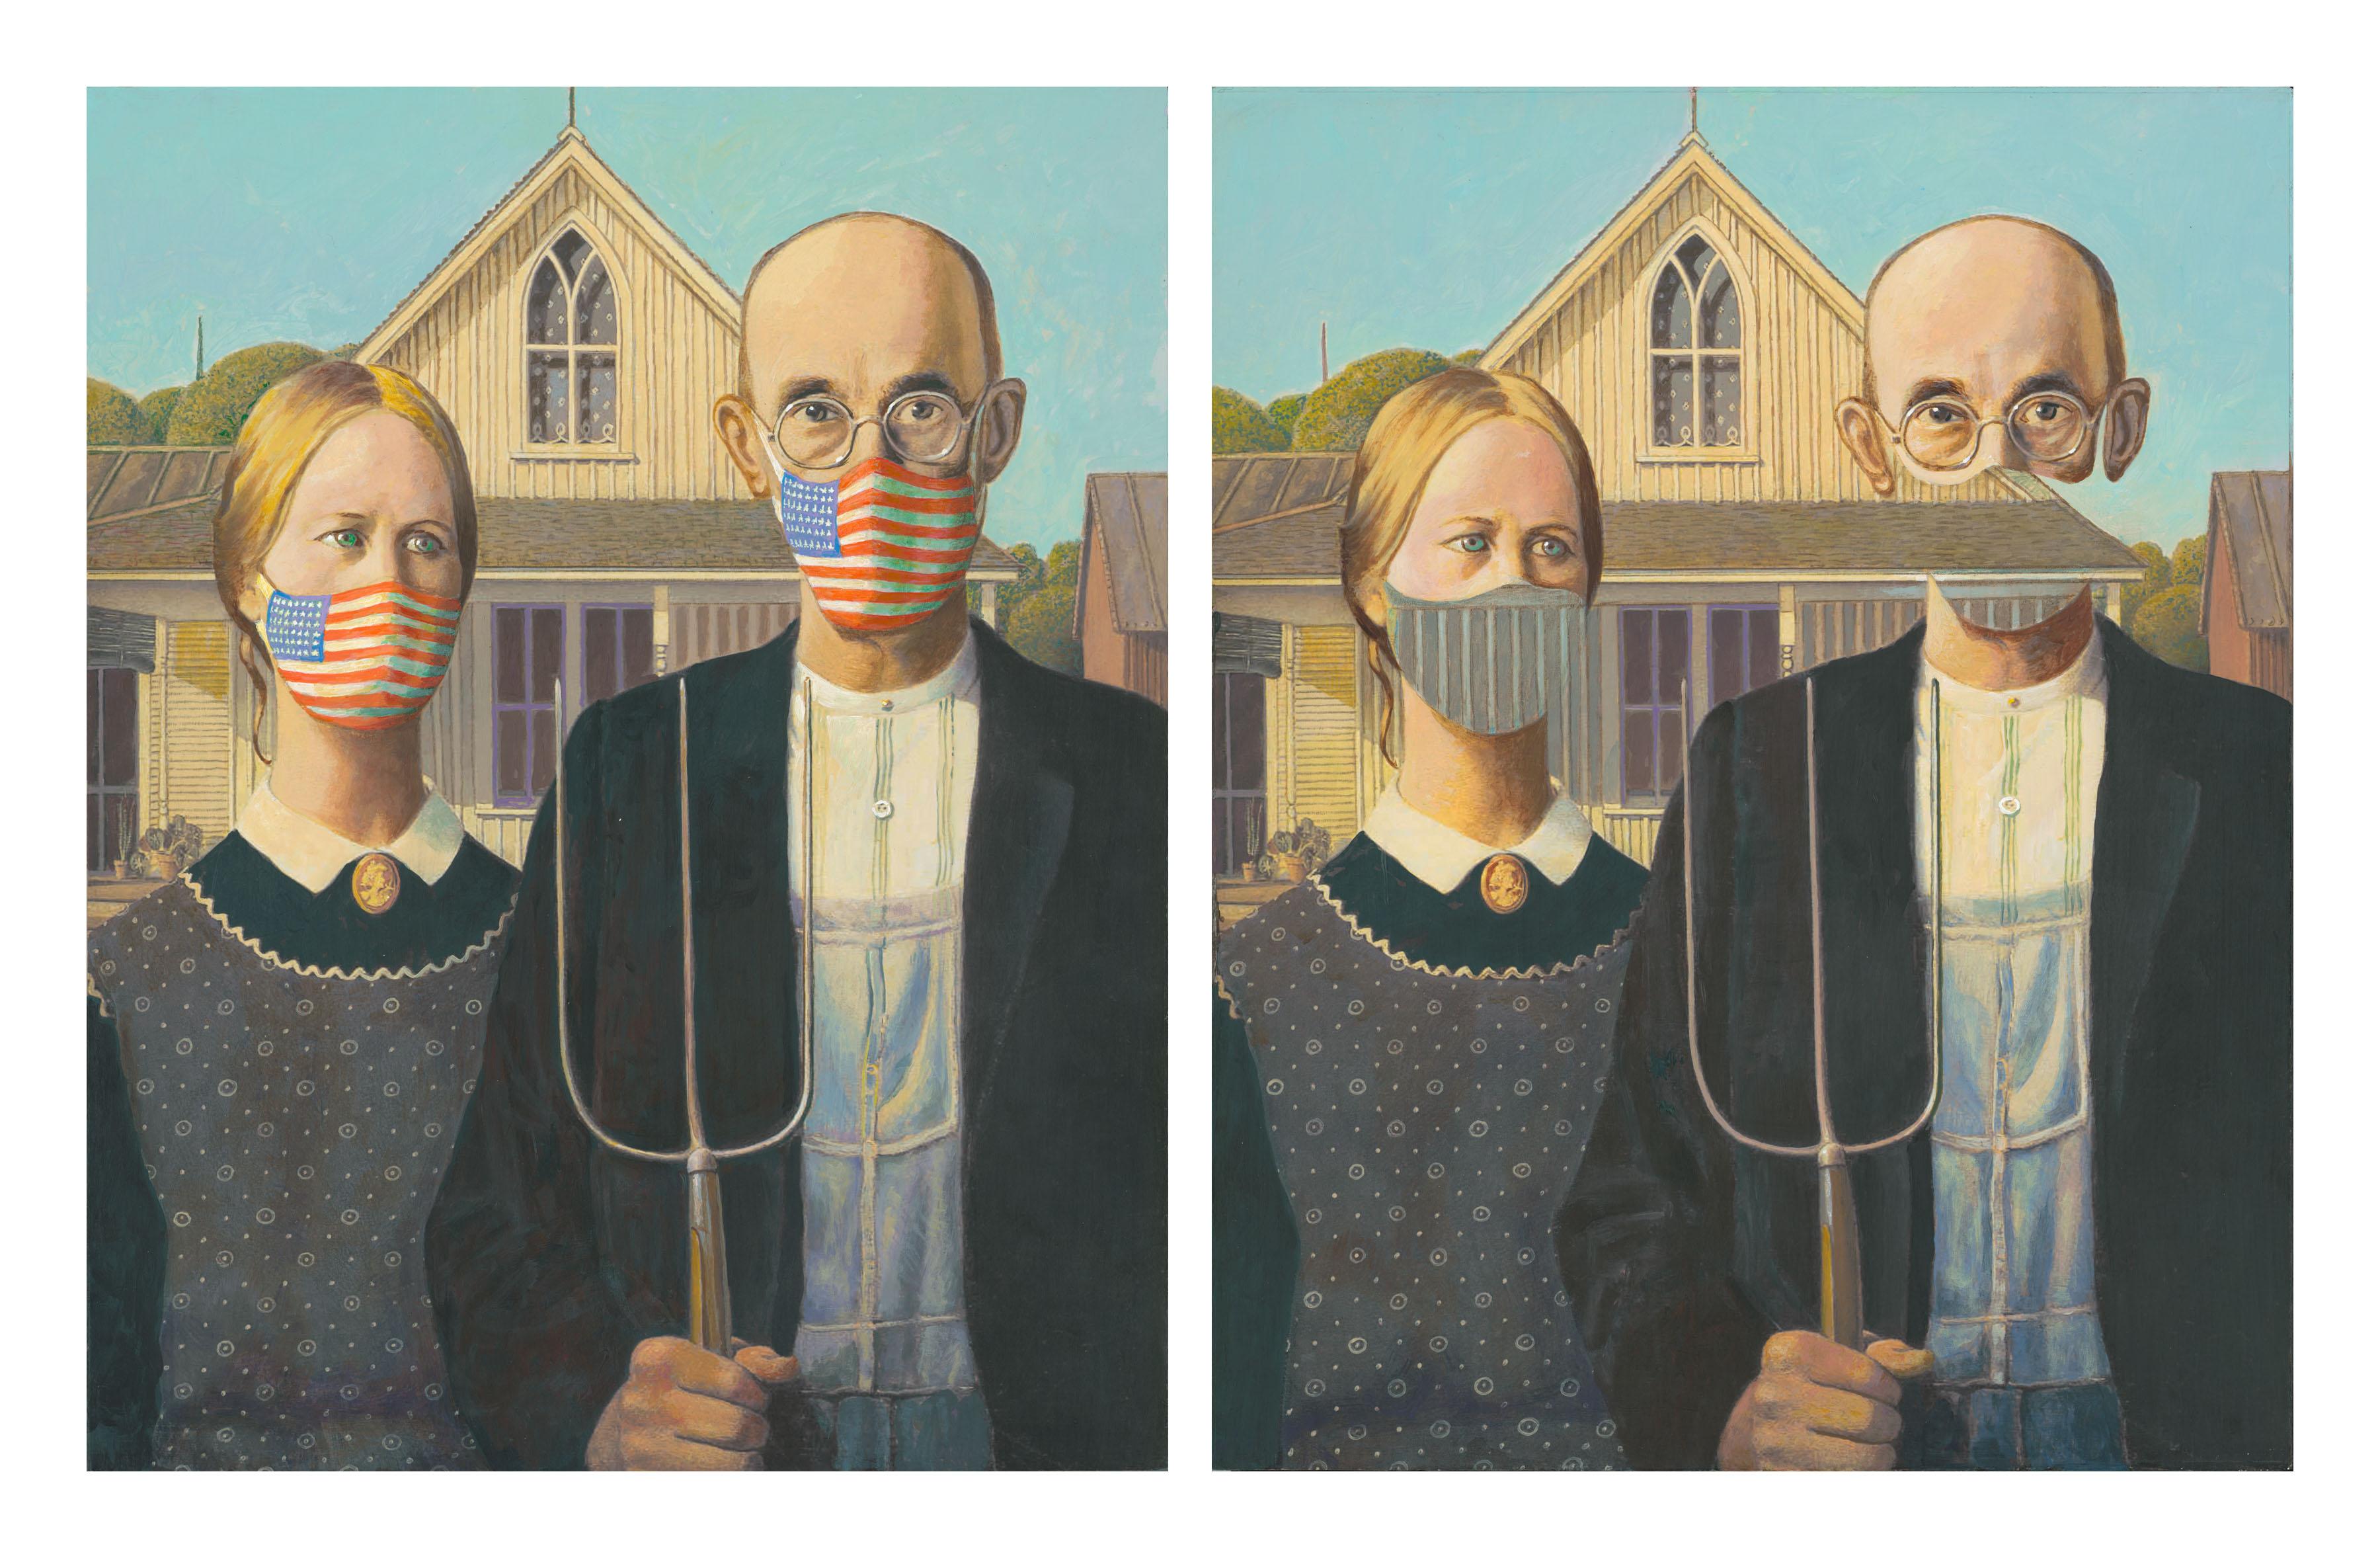 Clement Kamena Portrait Painting - Grant Wood “American Gothic” masked with the American flag & Unmasked